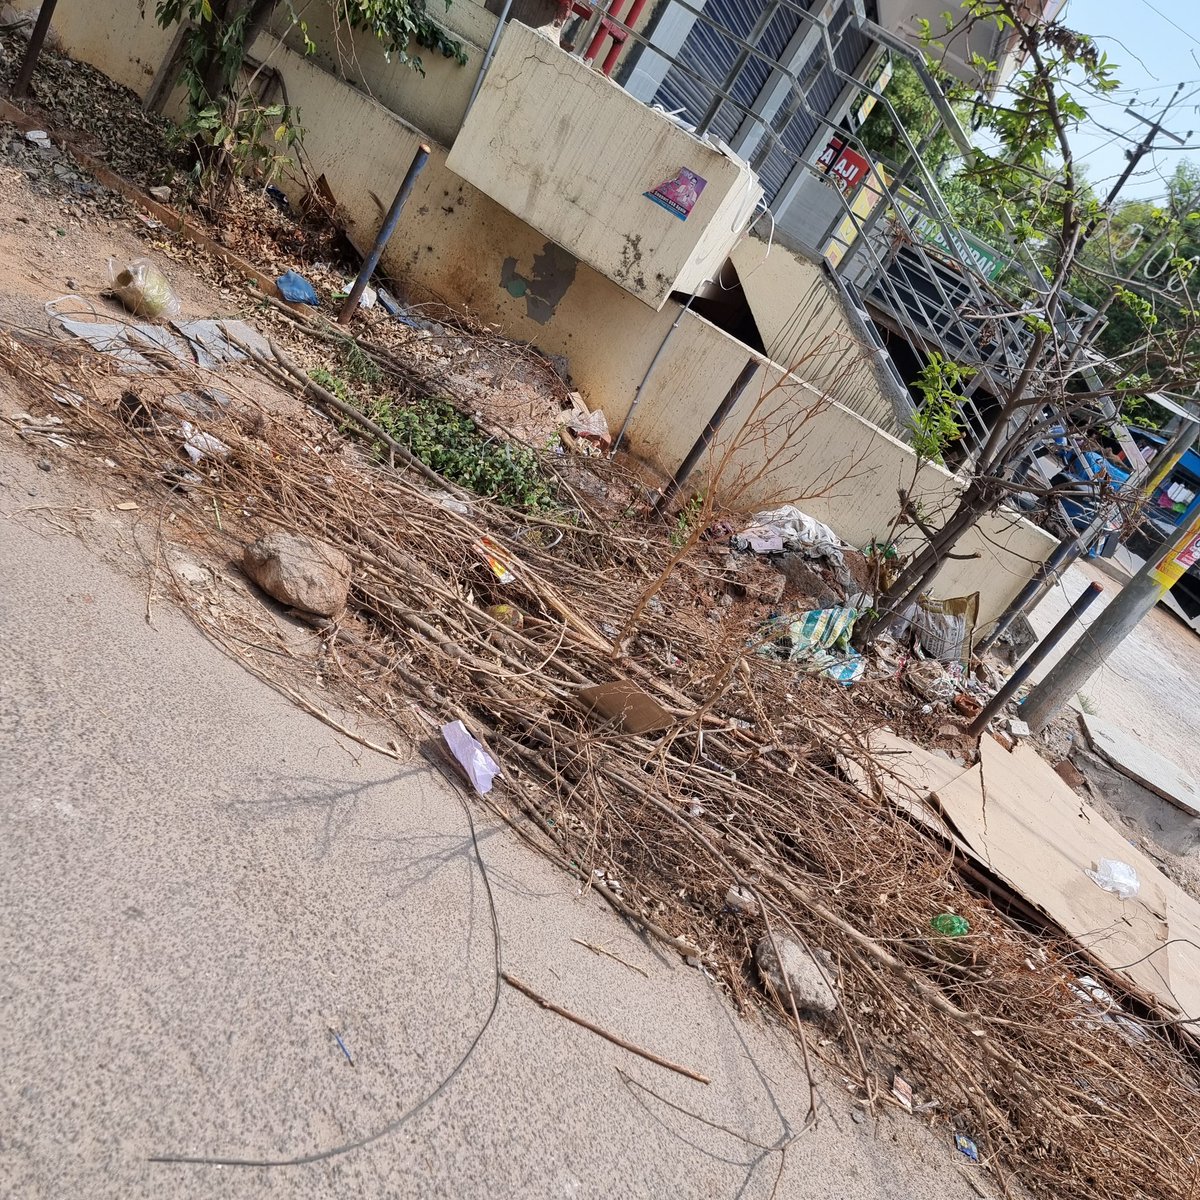 It is next to Vanasthalipuram Ratnadeep near Rythu Bazar..... No one cleans it even after telling incharge Rajakumar here, you can take appropriate action........

@CommissionrGHMC @GHMCOnline @ZC_LBNagar @DC_LBNagar @LbnagarTrPS